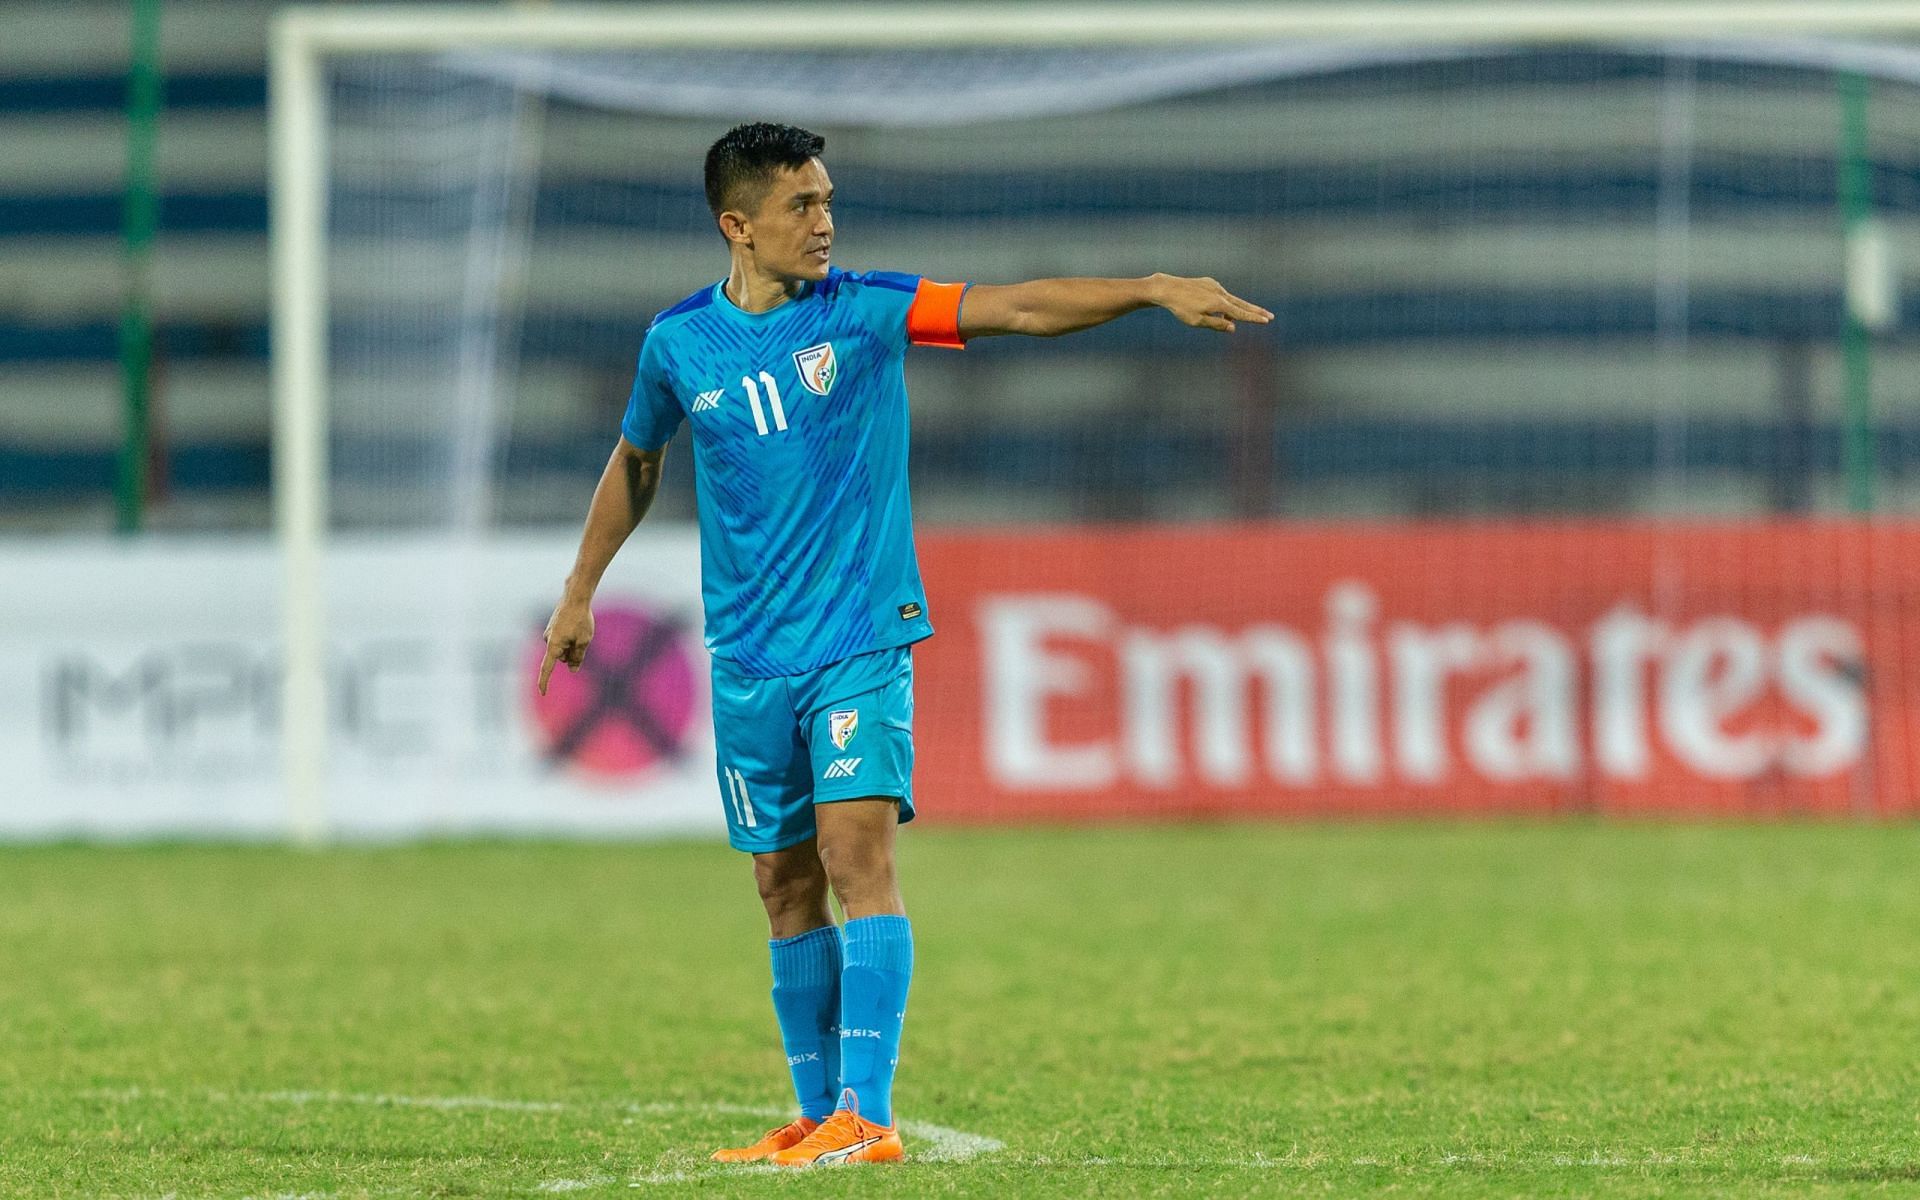 Sunil Chhetri has been in red-hot form for the Indian national team.